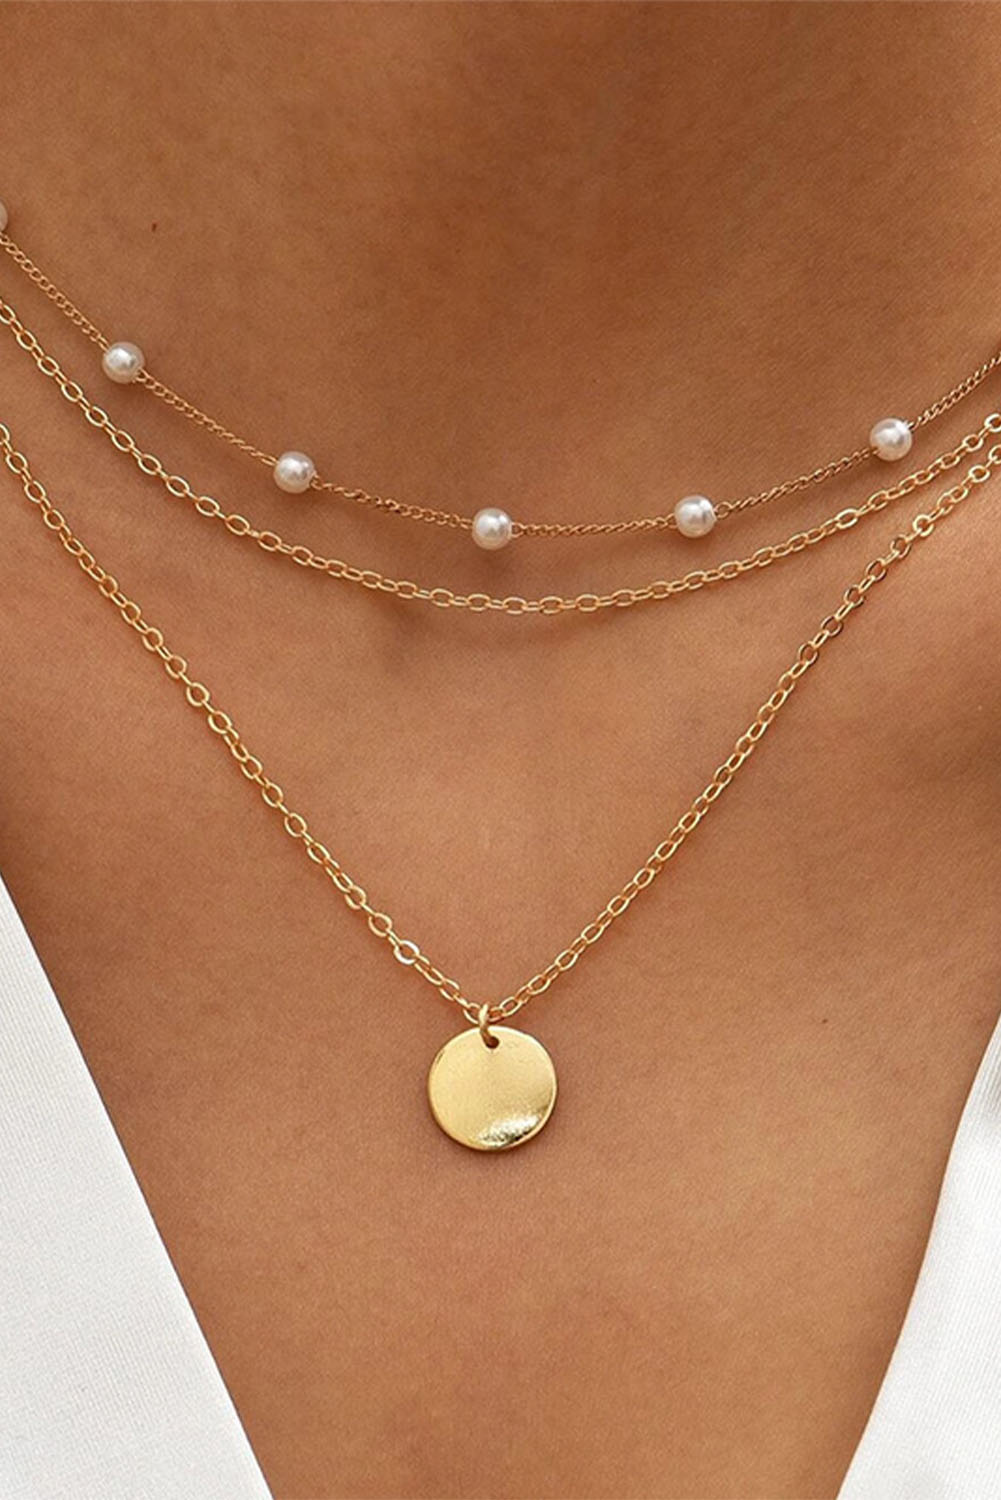 Dropshipping Golden Clavicle Chain PEARL Geometric Layered Necklace 